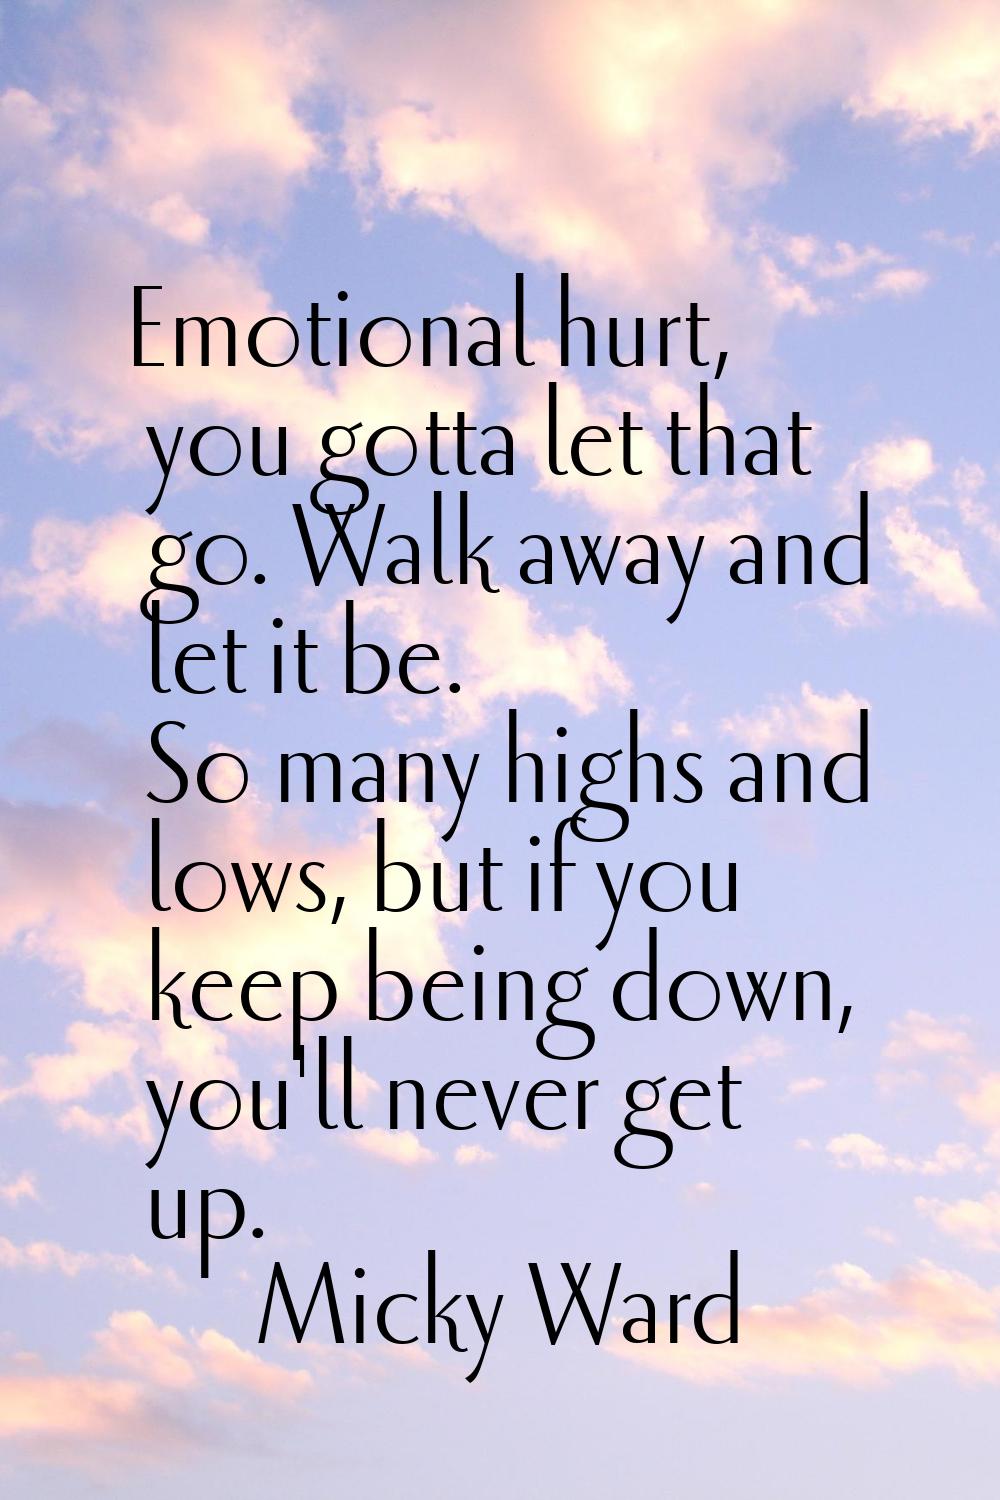 Emotional hurt, you gotta let that go. Walk away and let it be. So many highs and lows, but if you 